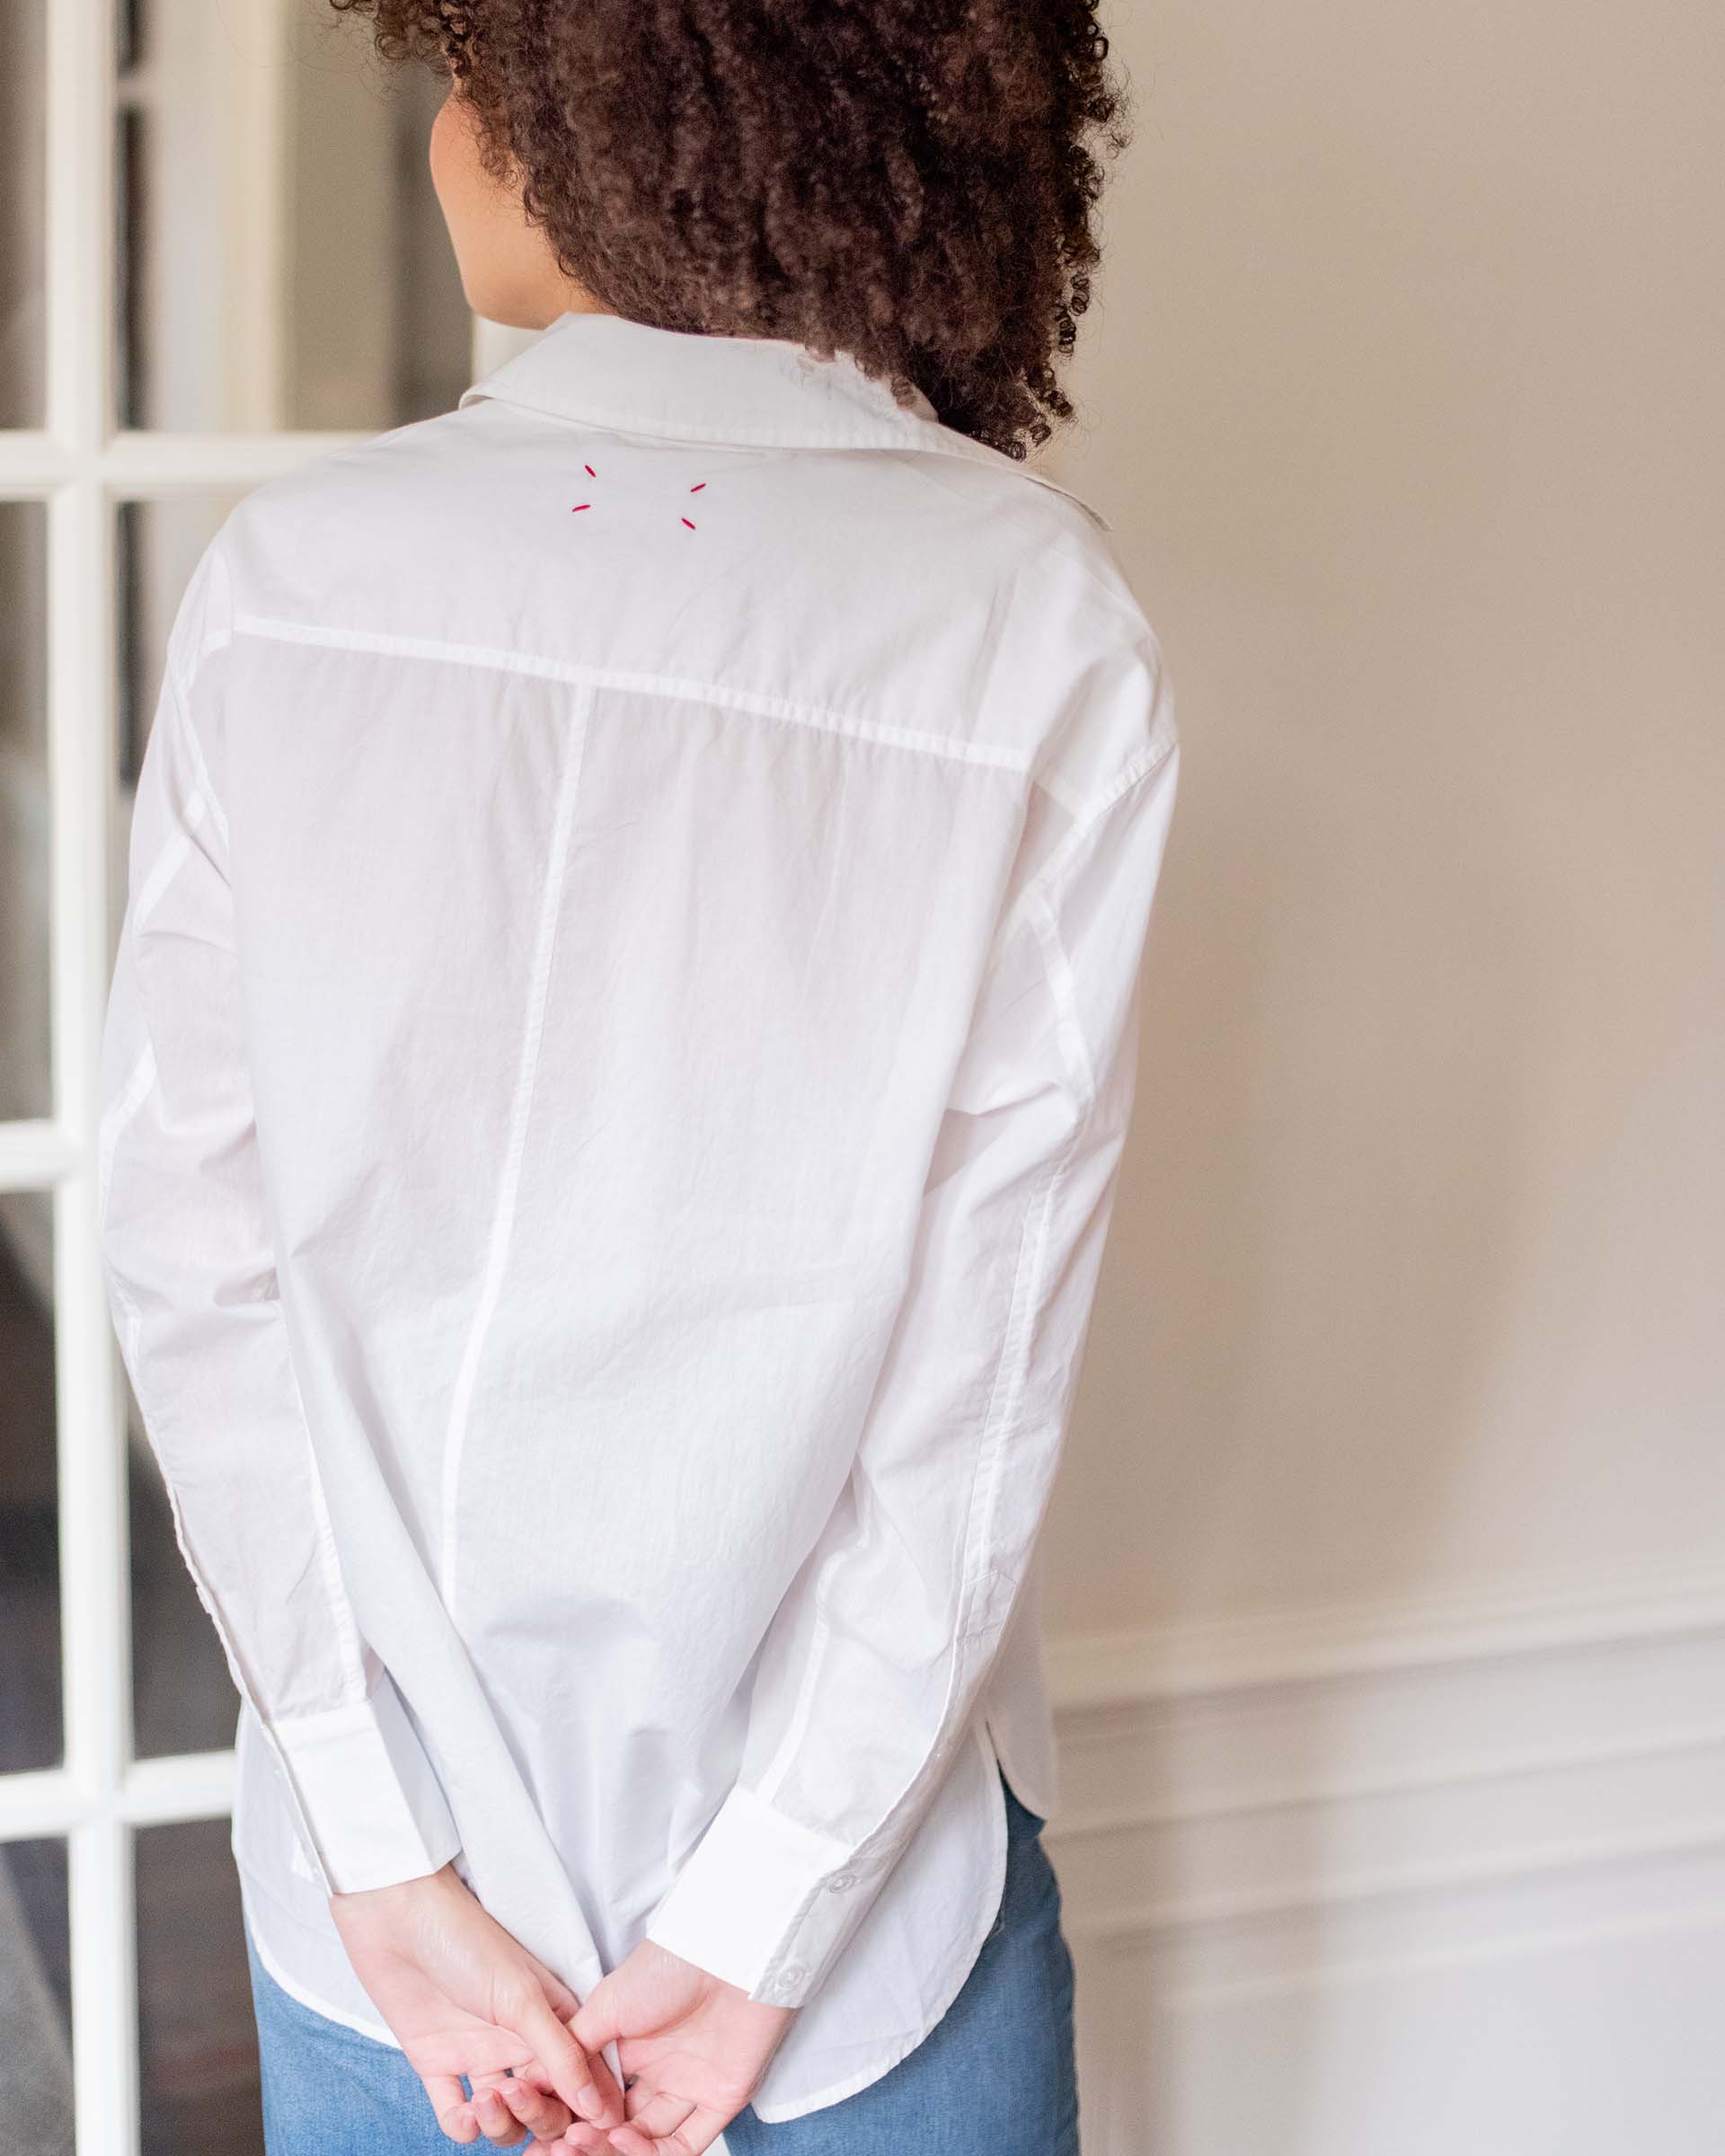 Women's White Breathable Relaxed Fit Button Up Shirt Rear View of Back